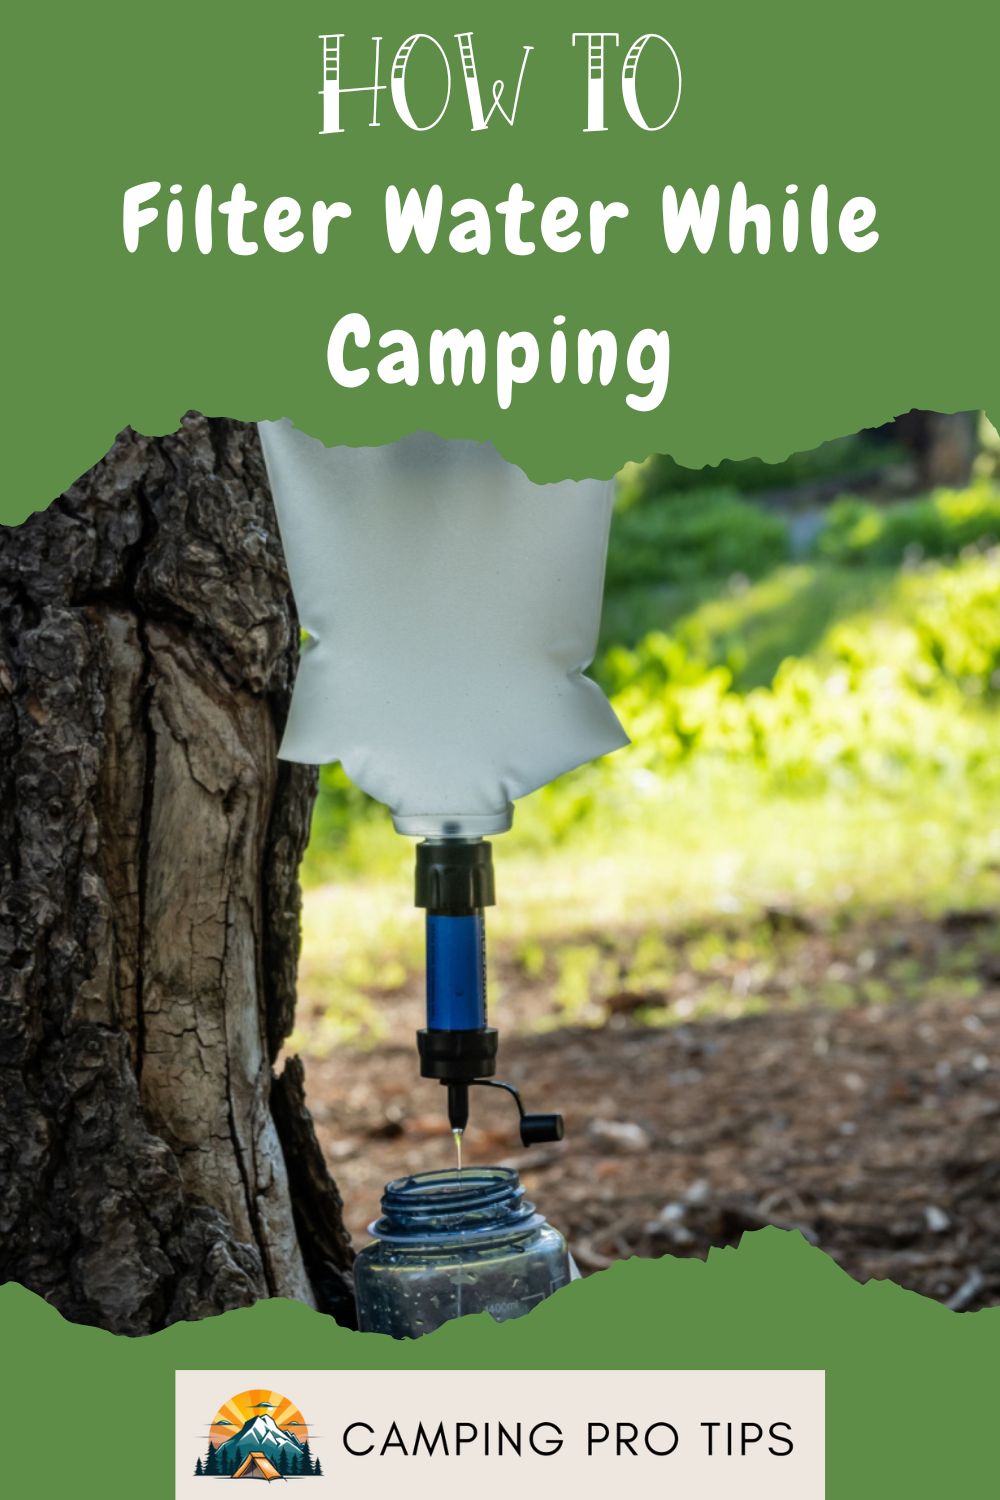 How to Filter Water While Camping